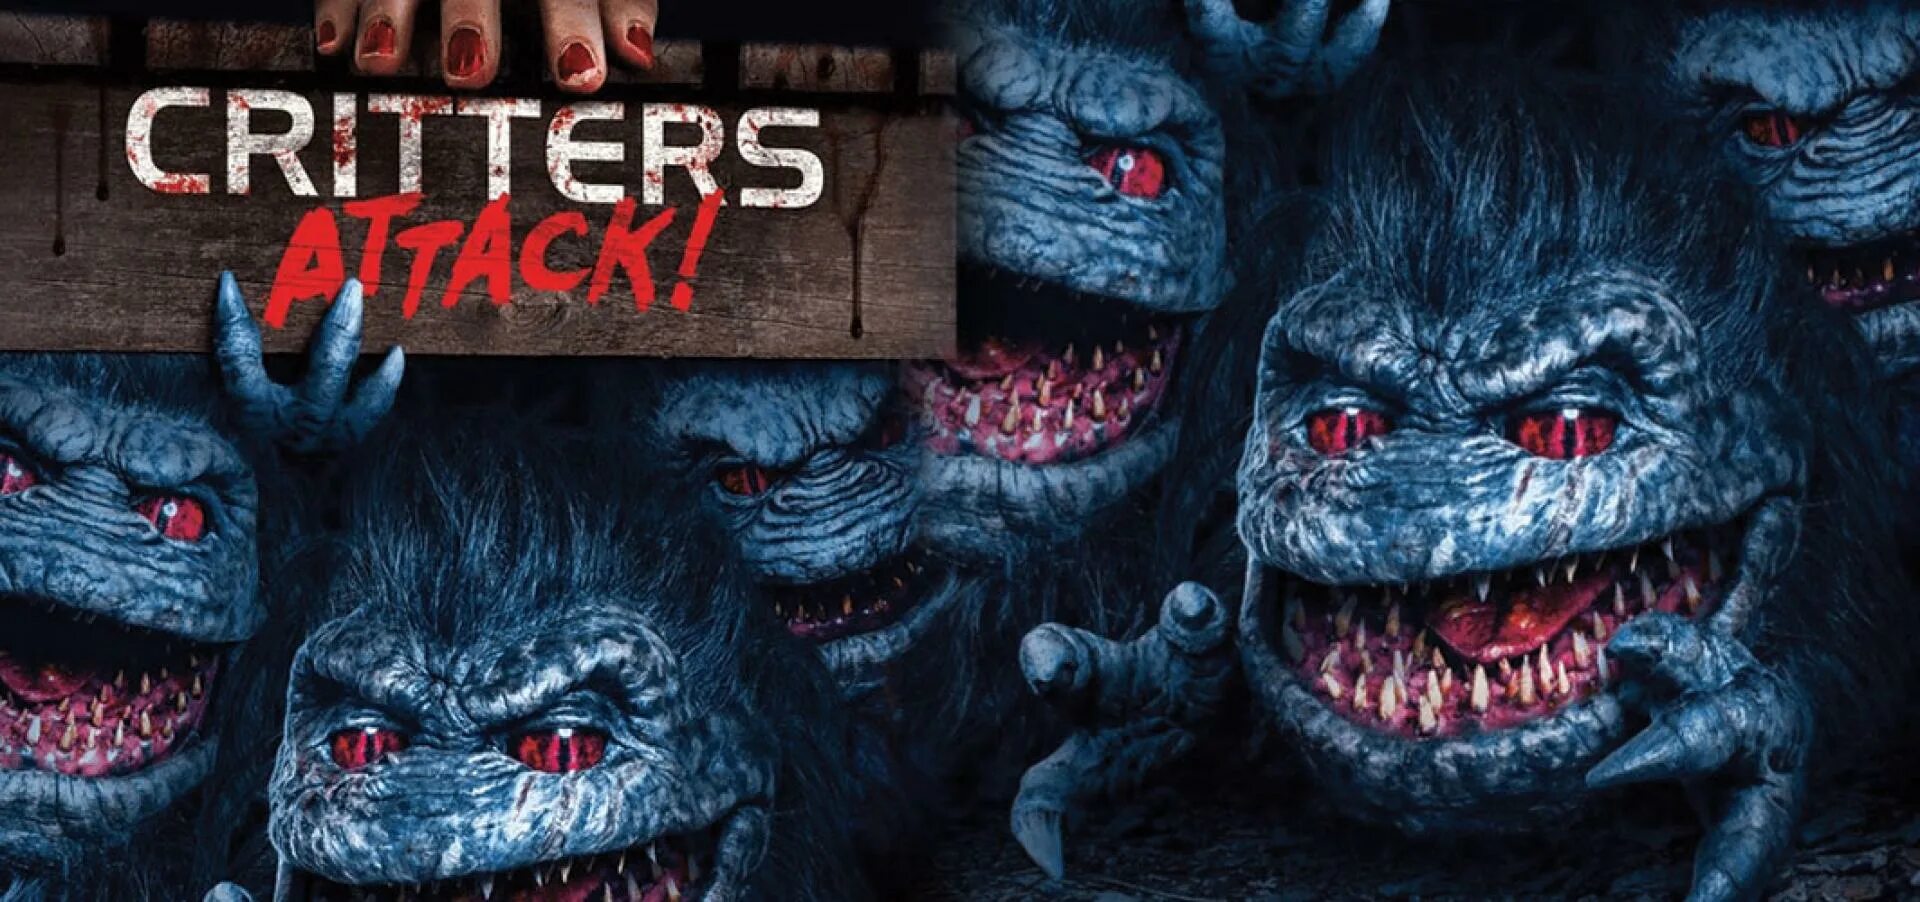 Песни smiling critters. Зубастики атакуют! / Critters Attack! (2019).